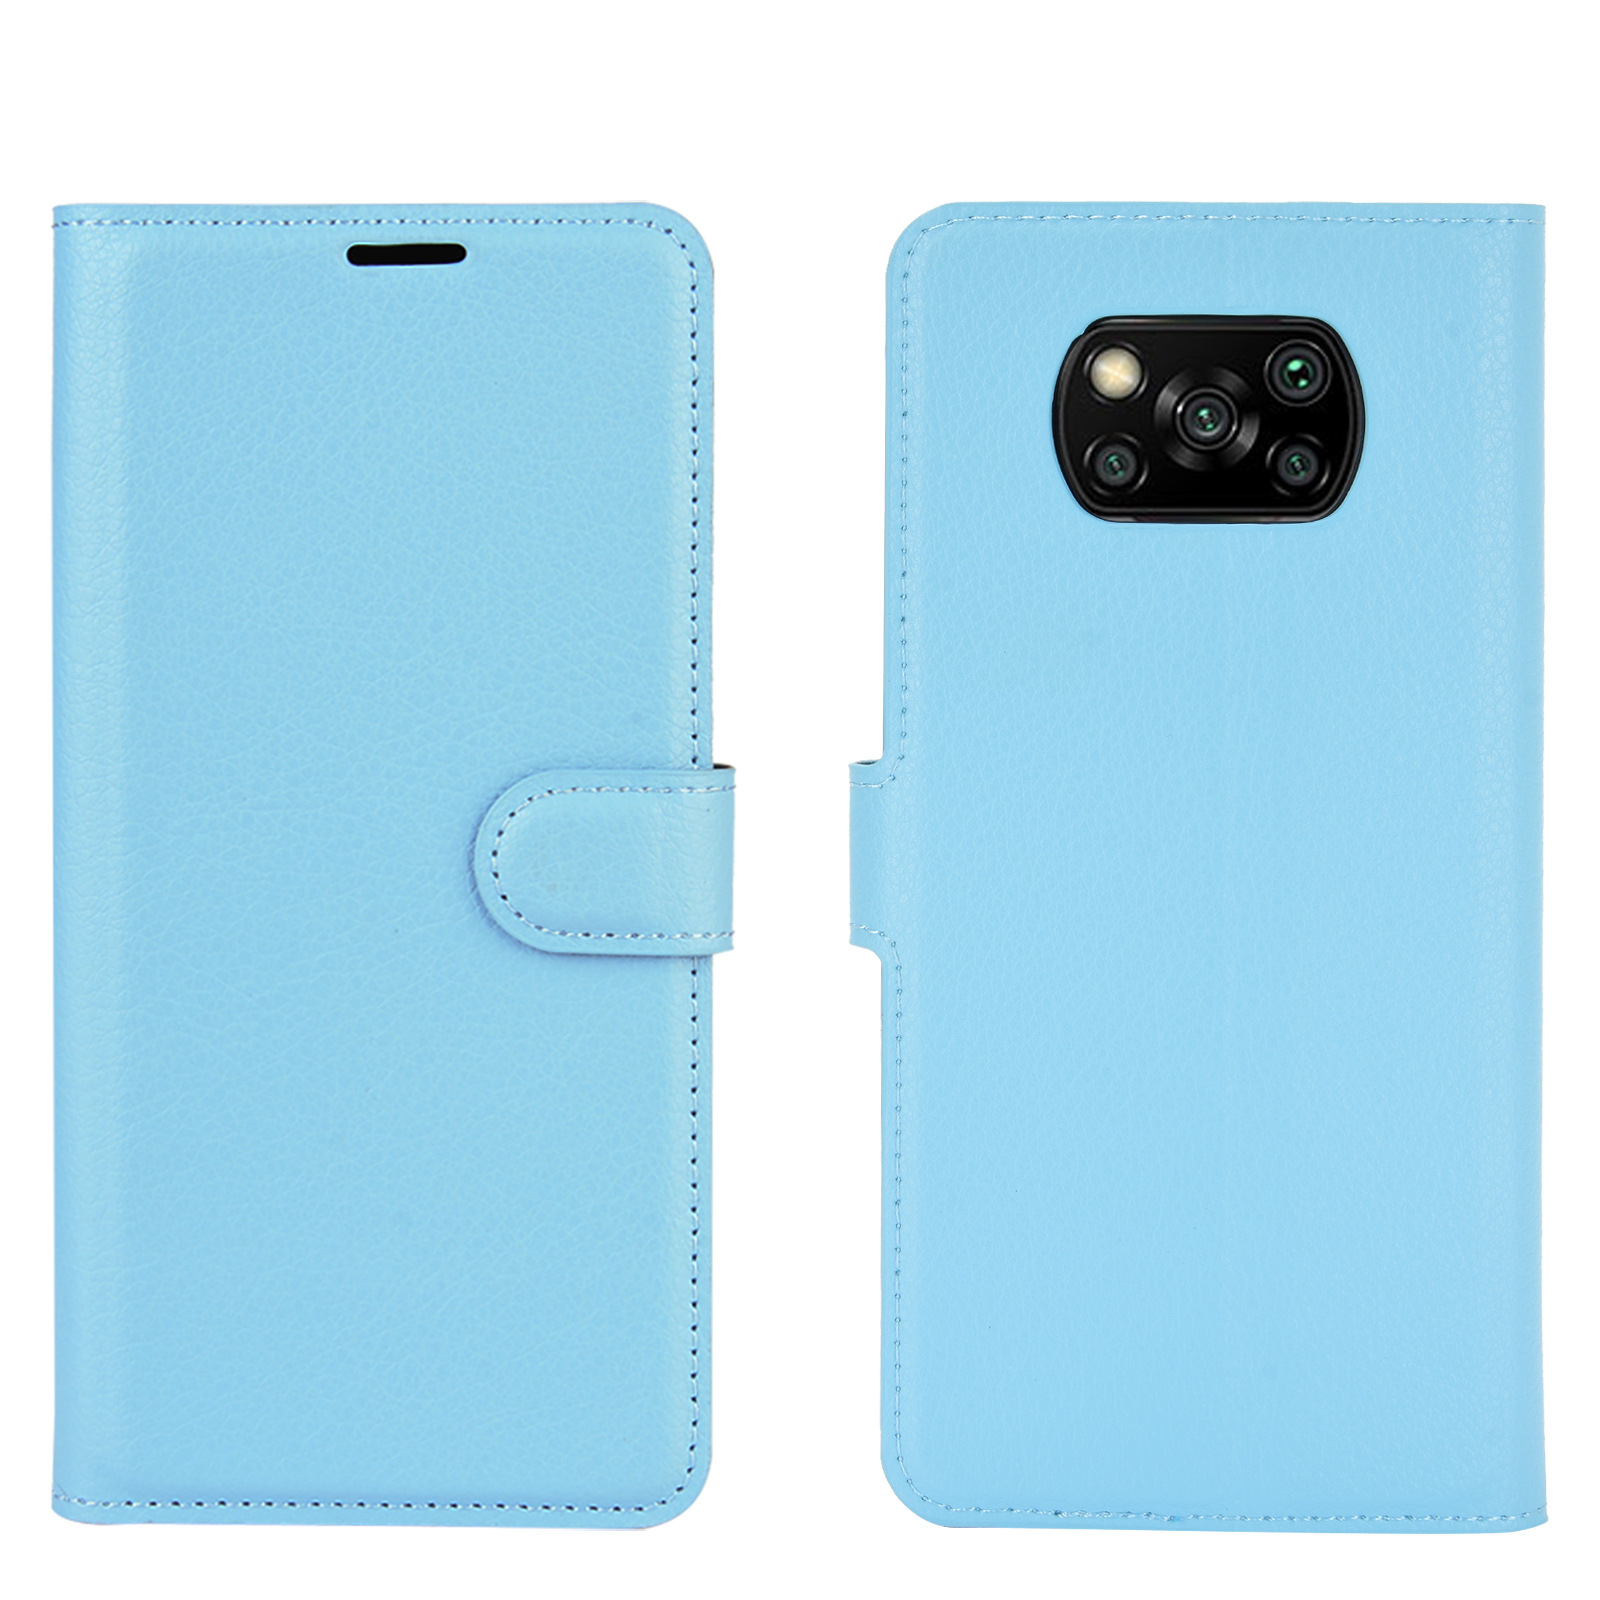 Bakeey-for-POCO-X3-PRO--POCO-X3-NFC-Case-Litchi-Pattern-Flip-Shockproof-PU-Leather-Full-Body-Protect-1847324-6